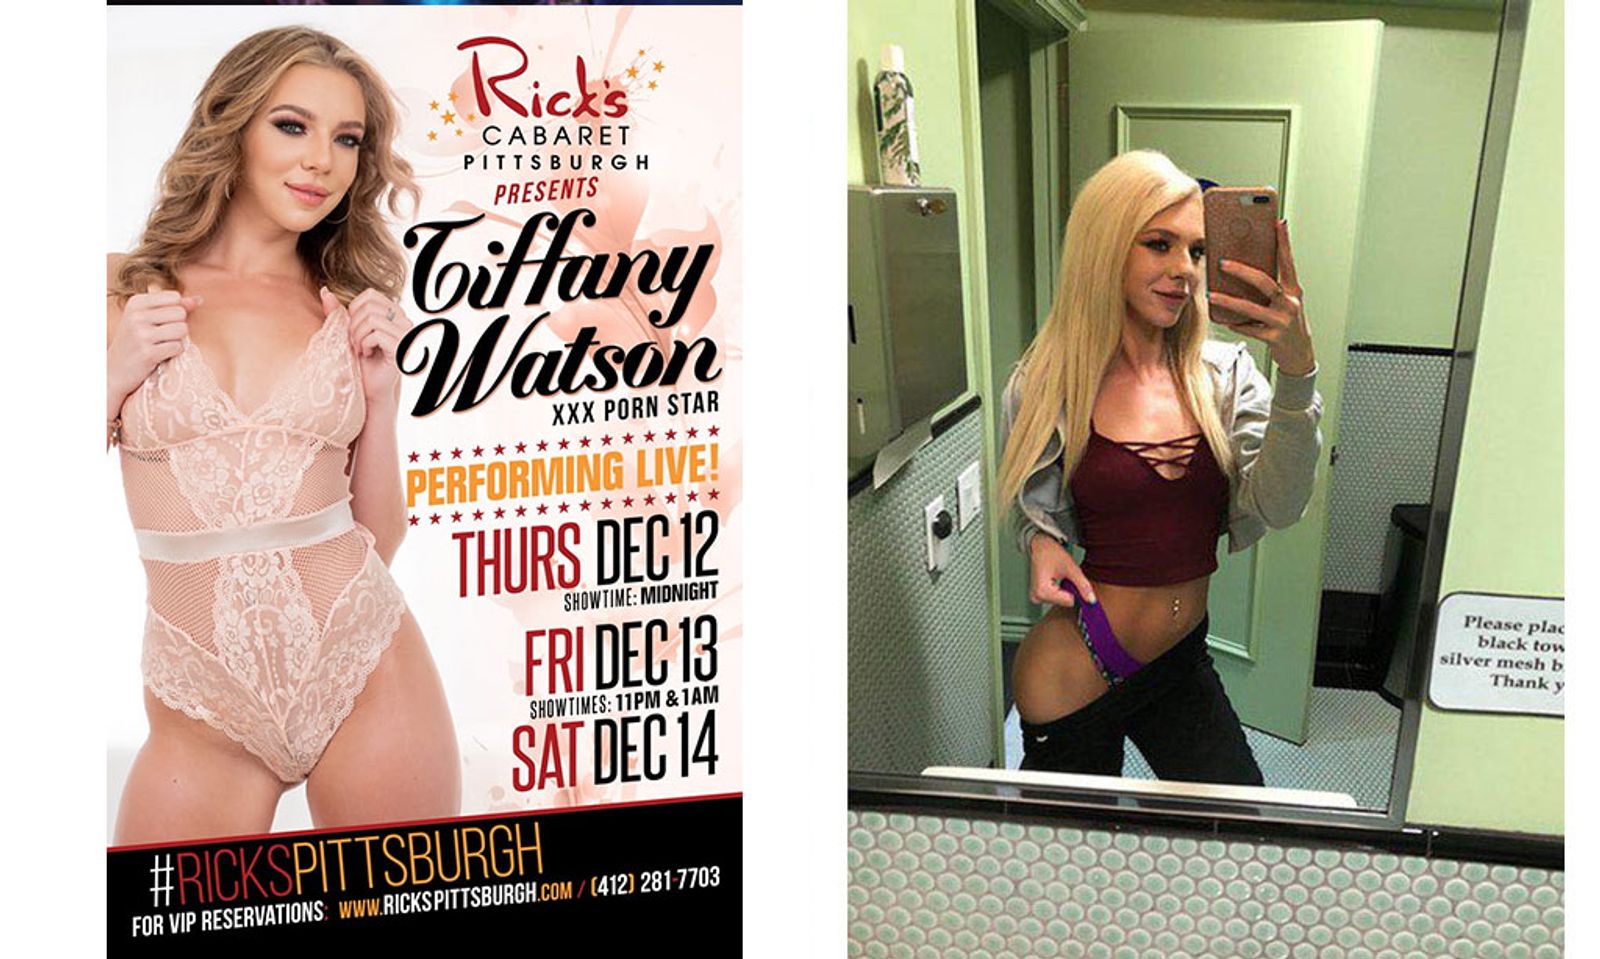 Tiffany Watson Heads to Pittsburgh to Feature at Rick’s Cabaret